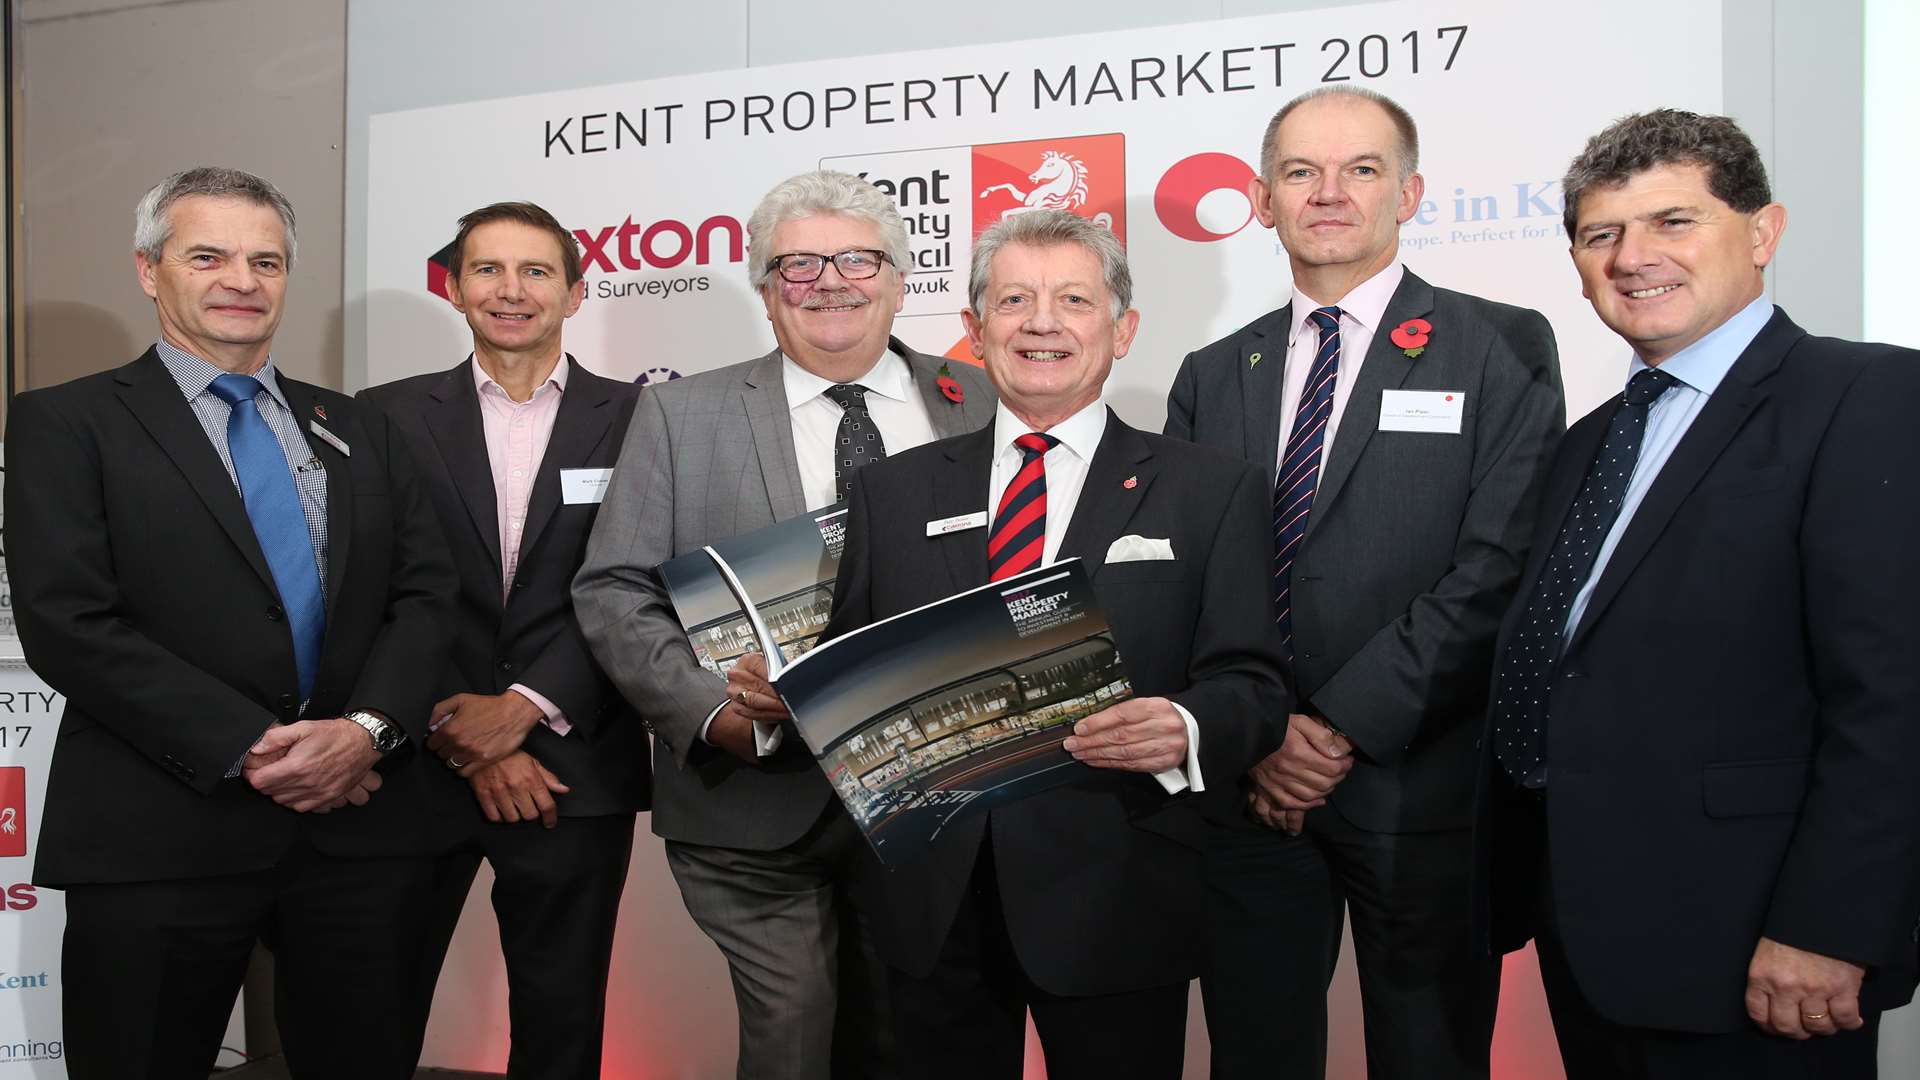 Launching the Kent Property Market Report 2017, from left, David Gurton and Mark Coxon of Caxtons, KCC's Cllr Mark Dance, Caxtons chairman Ron Roser, Ebbsfleet Development Corporation interim chief executive Ian Piper and Locate in Kent chief executive Paul Wookey